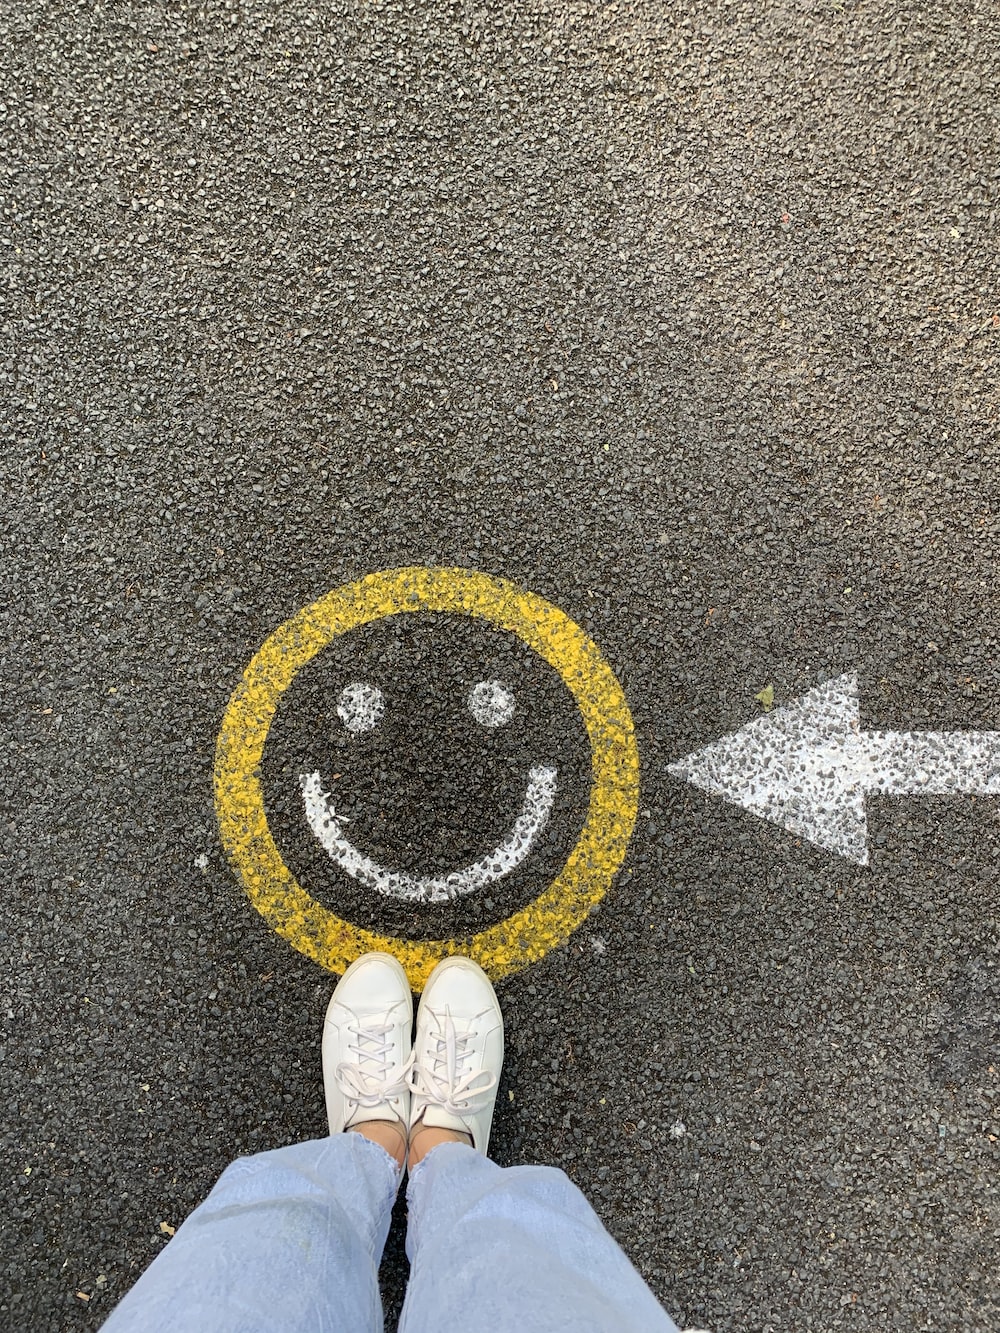 A person standing on the street with a smiley face drawn on the ground - Smile